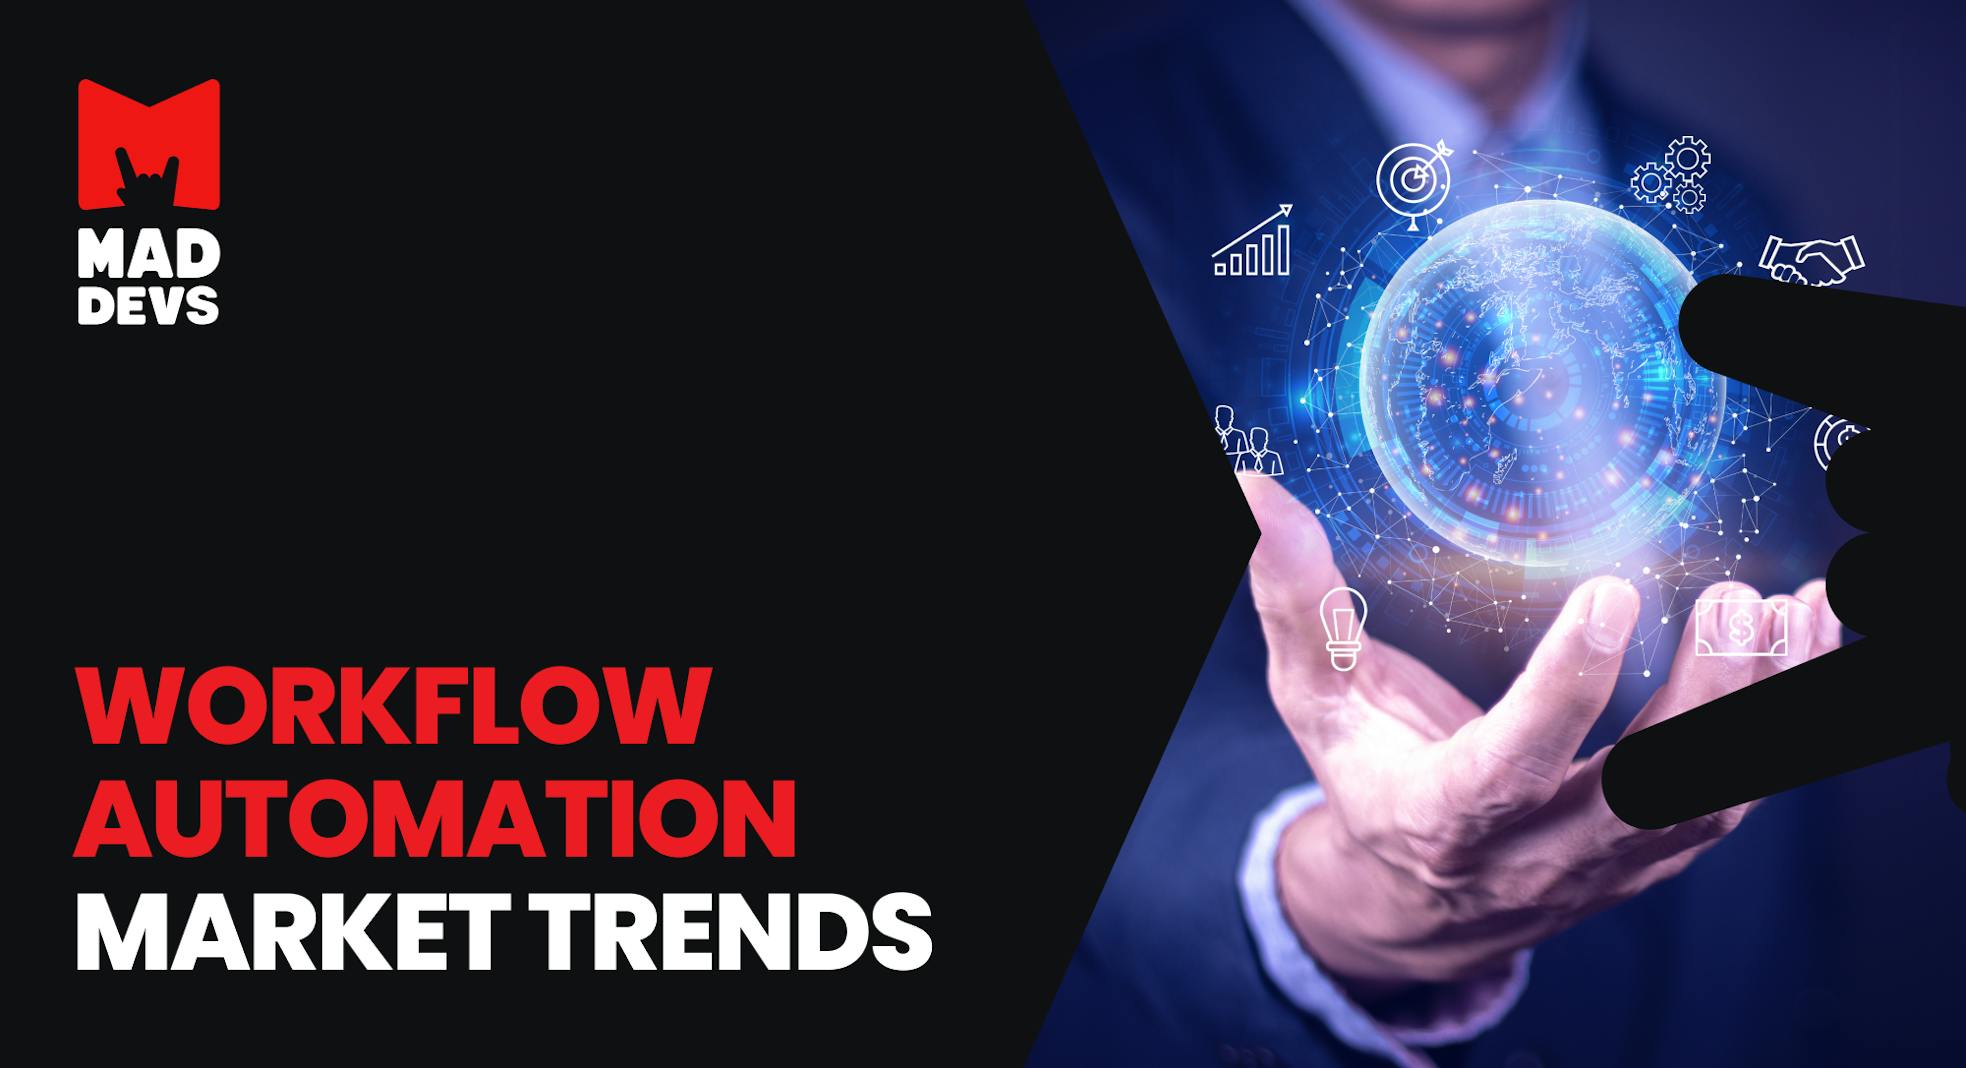 Overview of Workflow Automation Market Trends